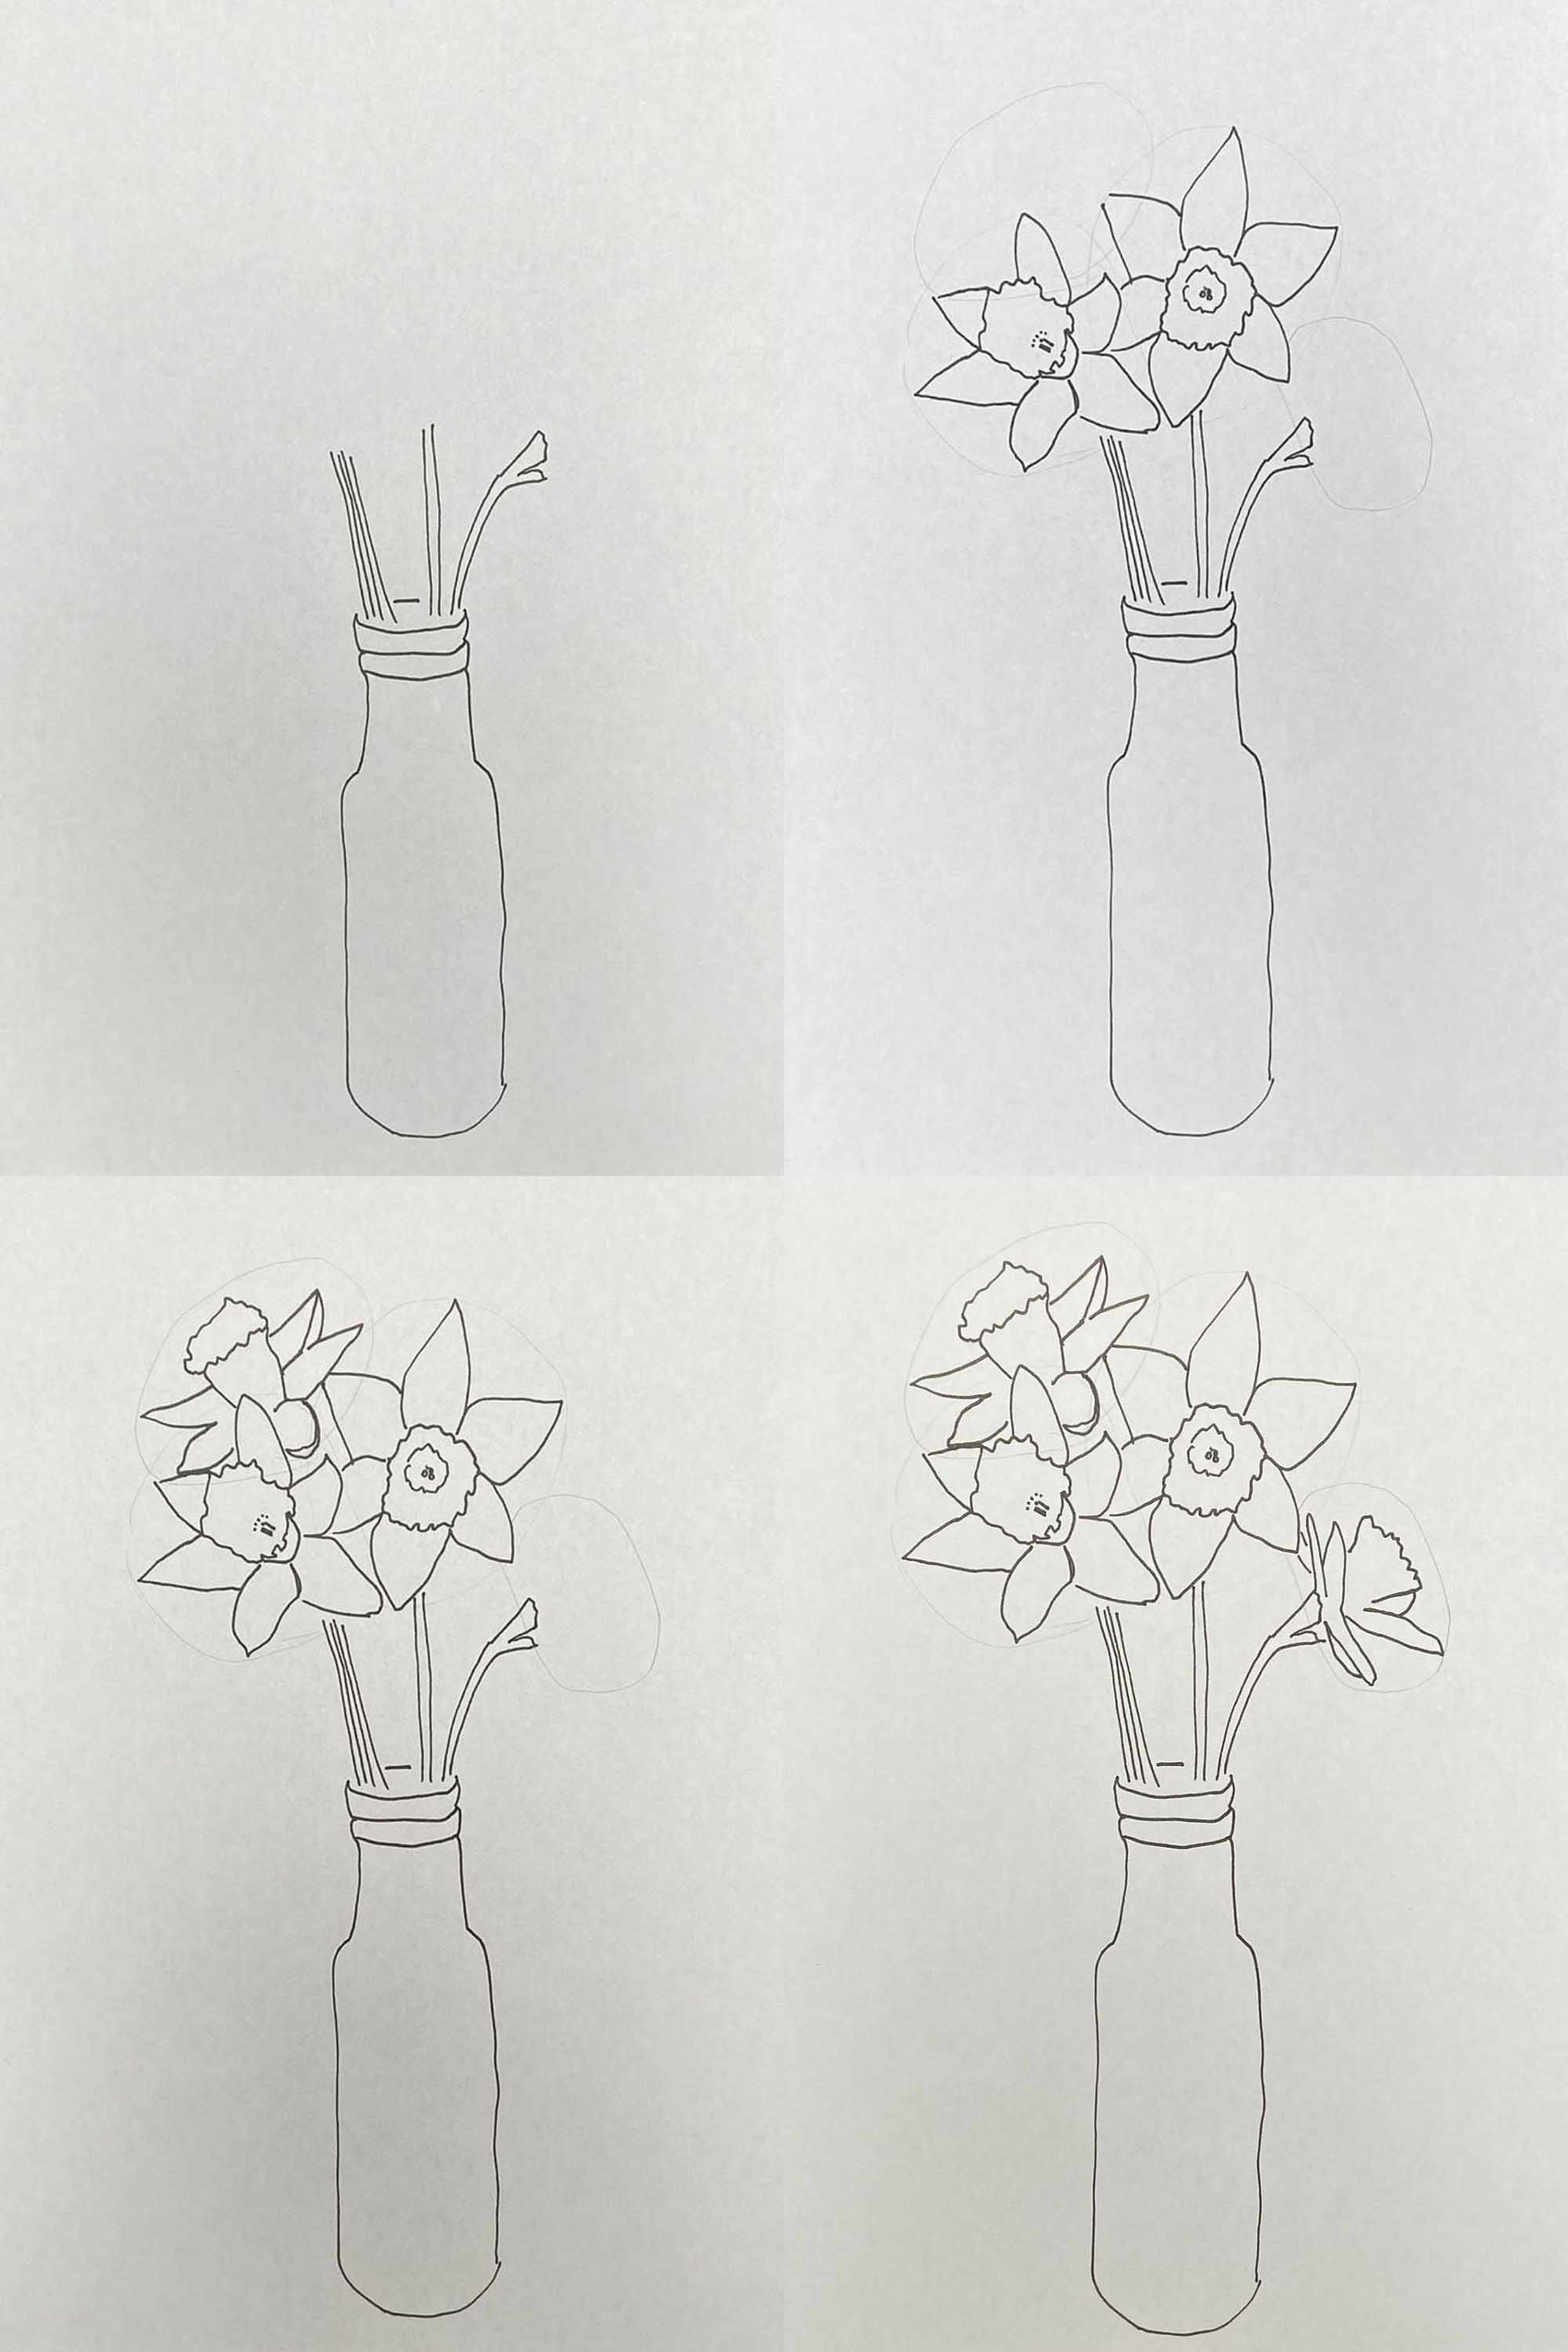 How to draw a bunch of daffodils in a vase